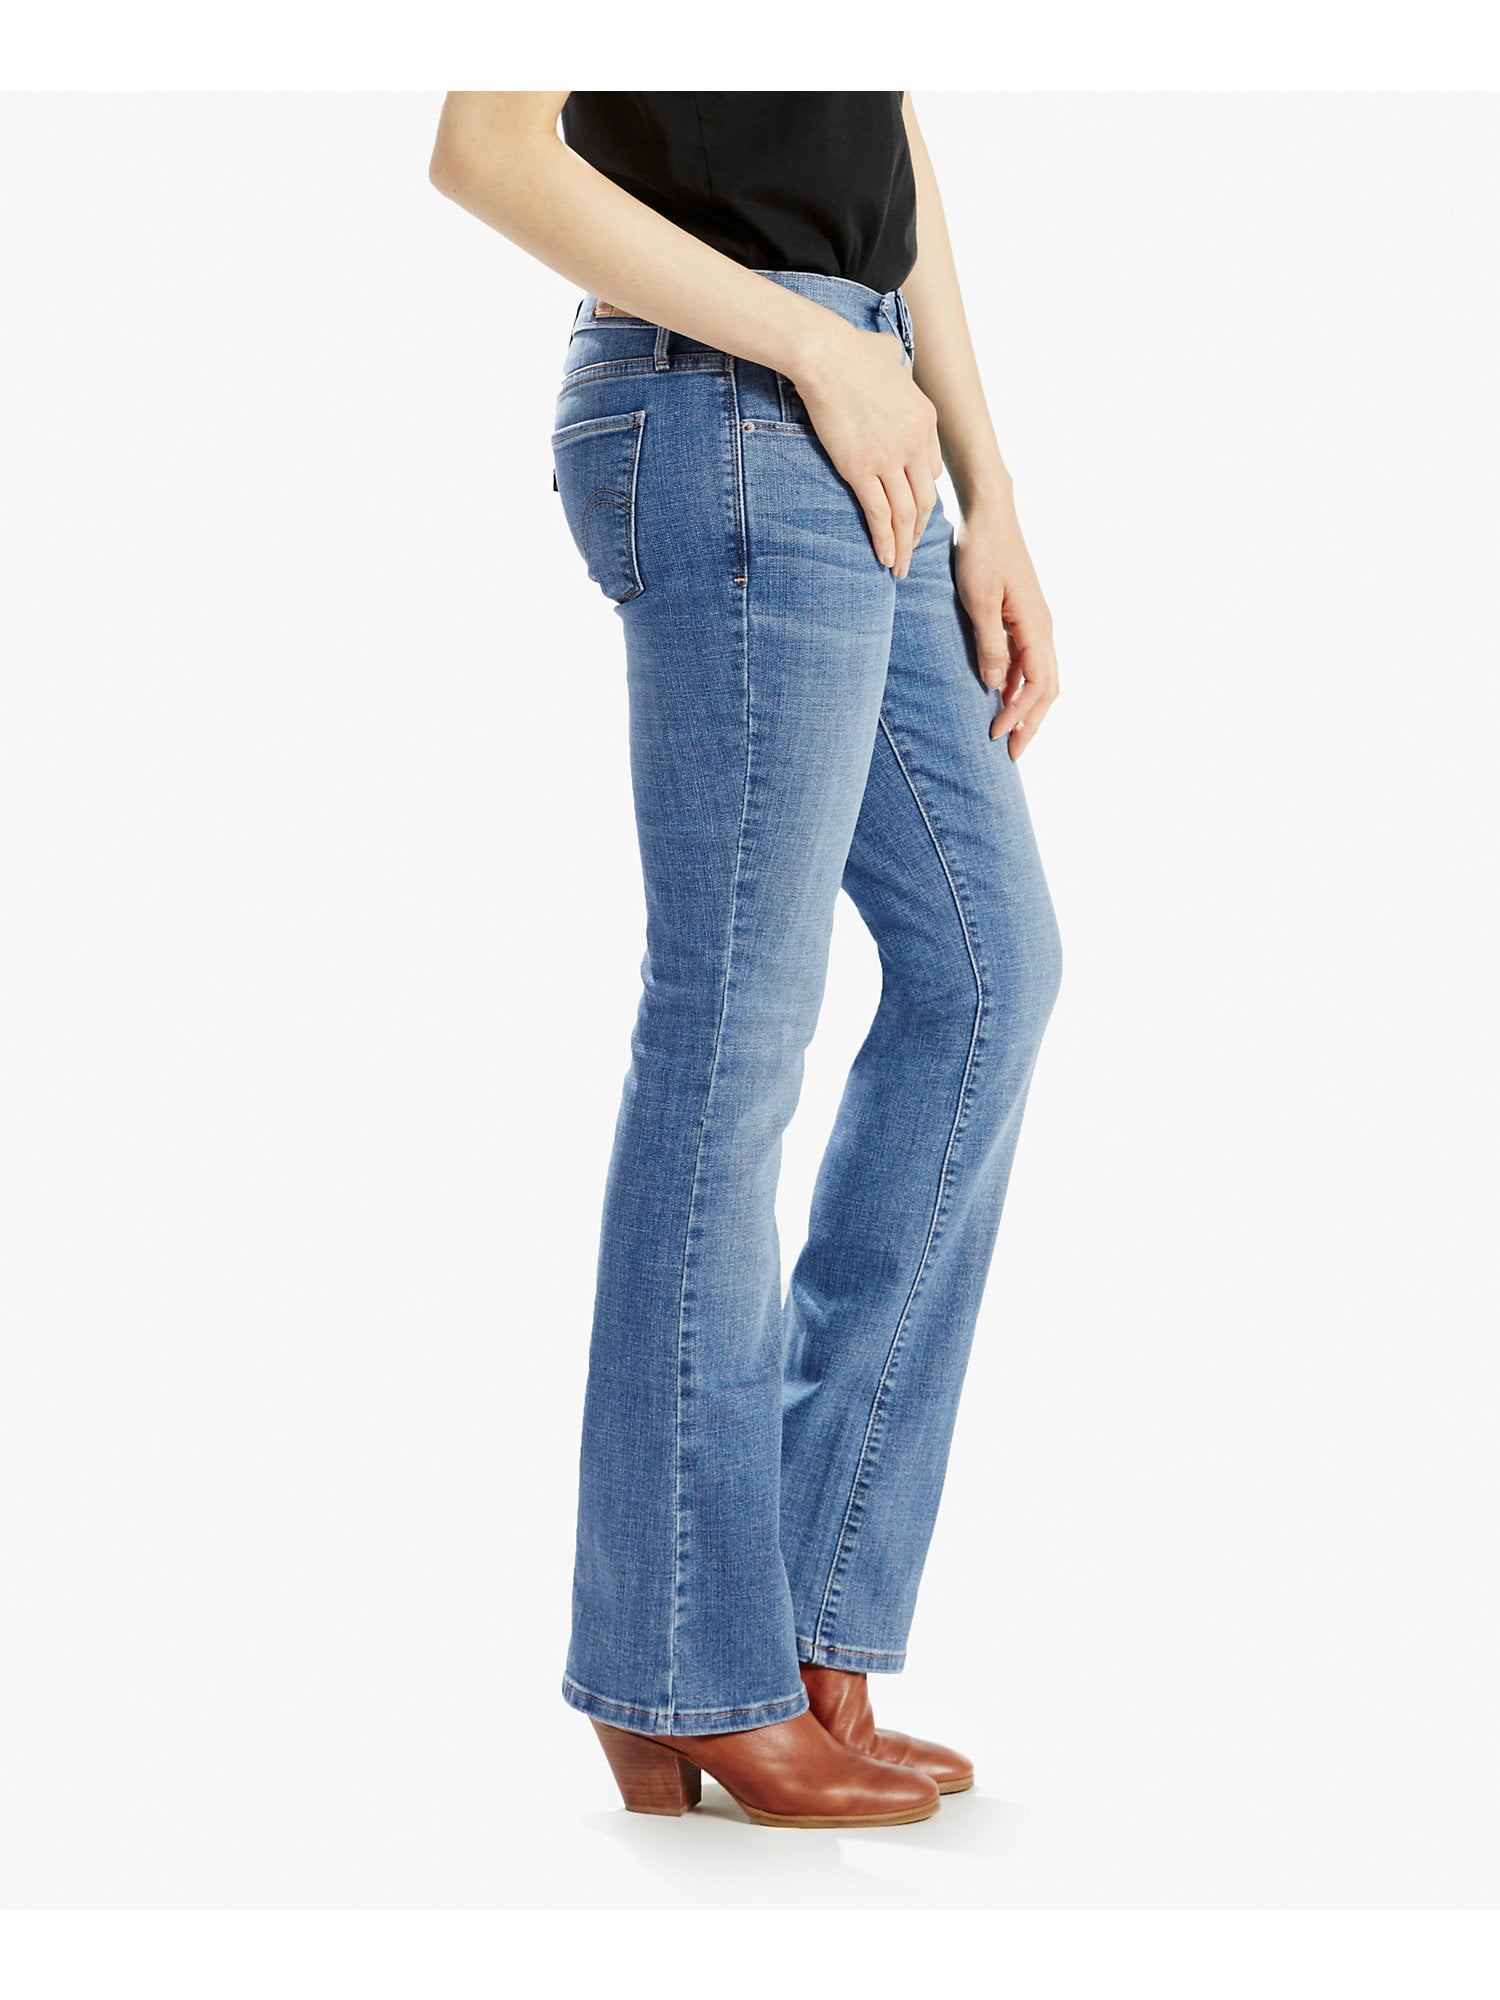 levi's 515 bootcut womens jeans